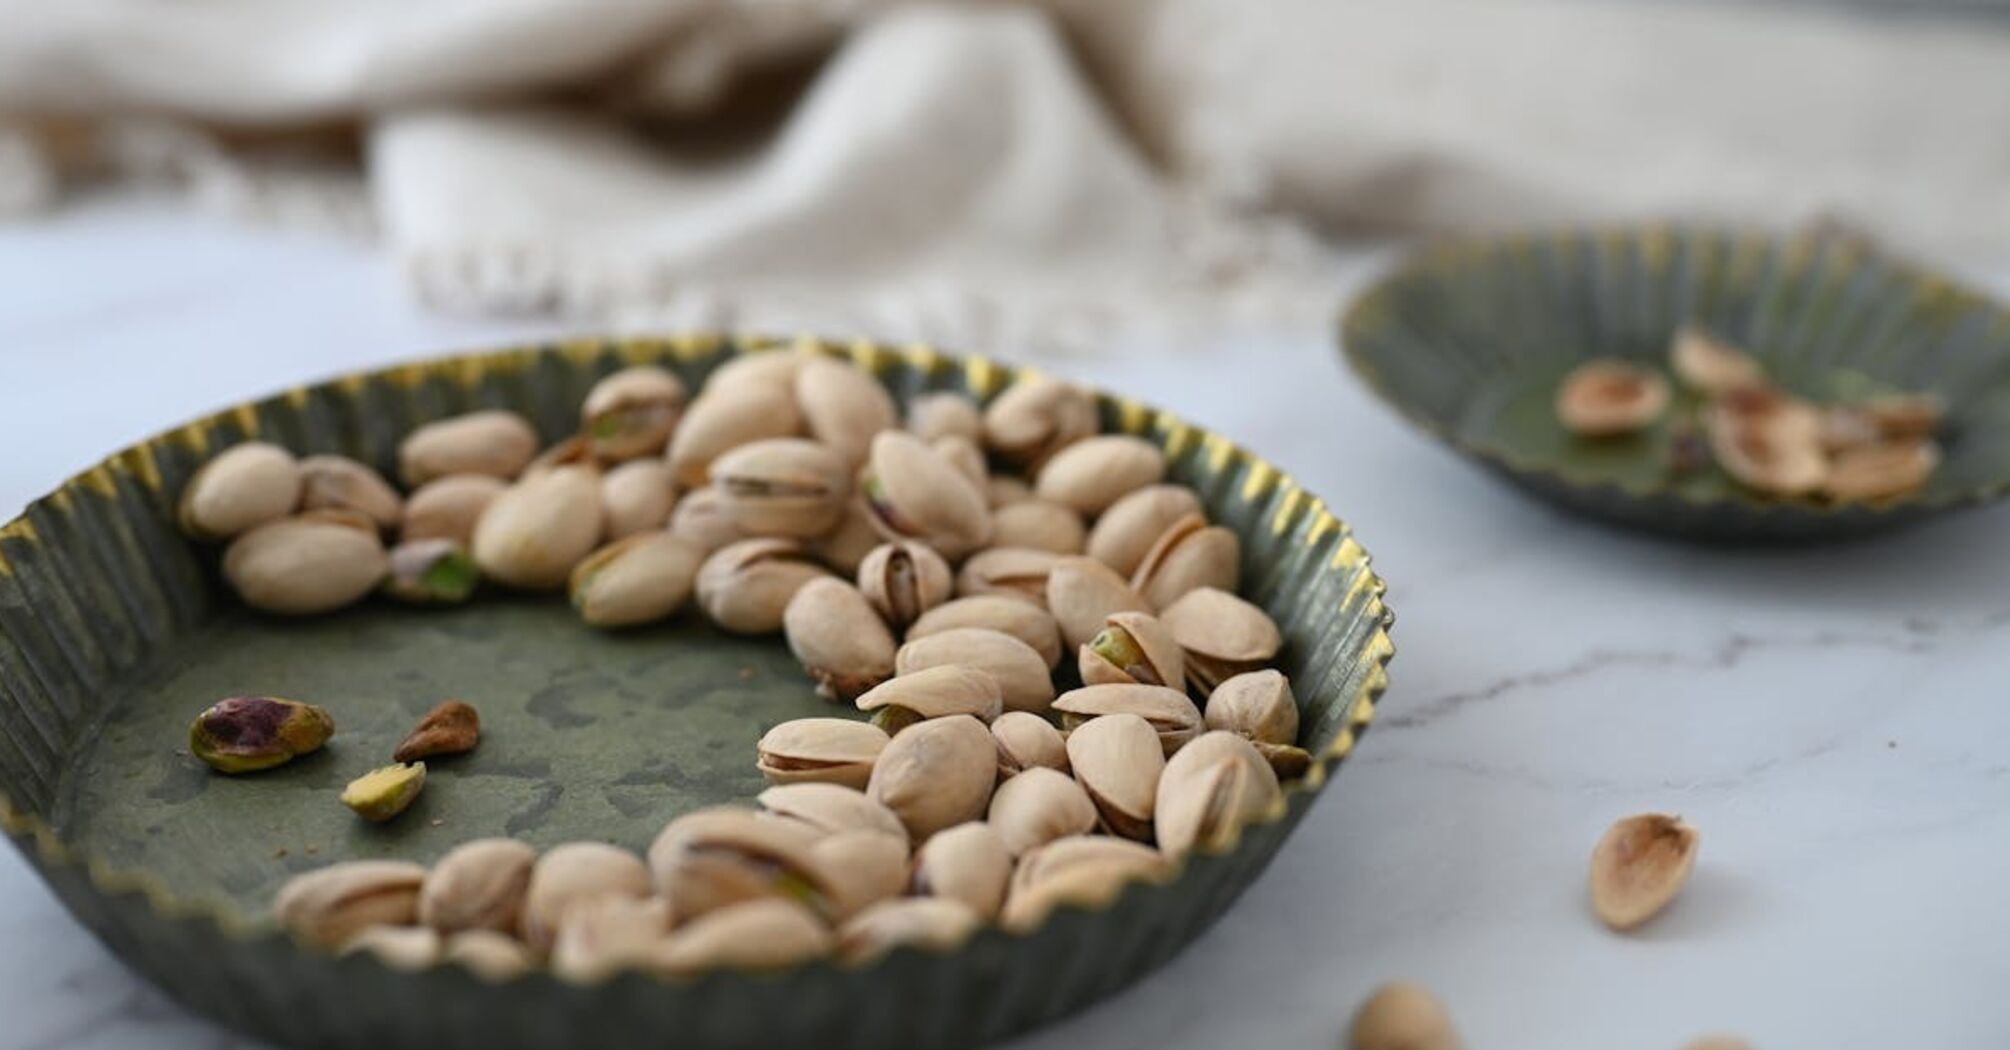 Easy ways to open pistachios: no hammer required